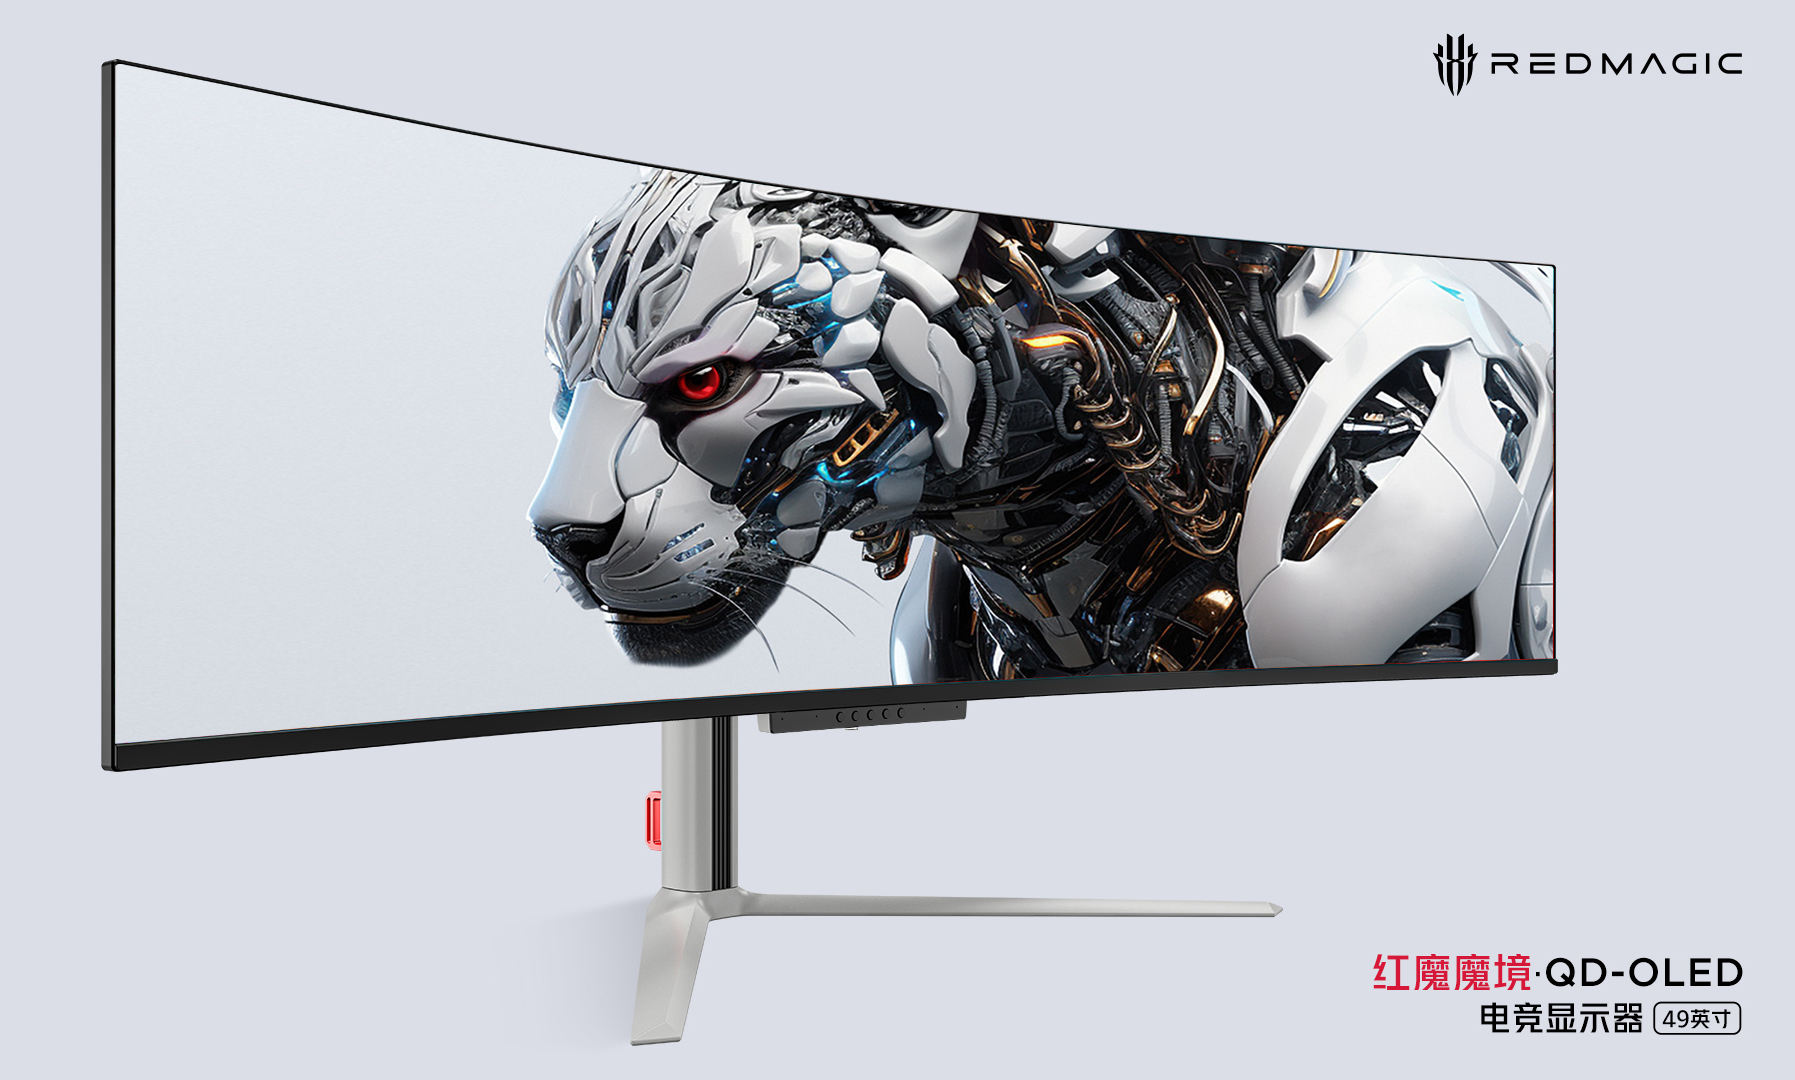 It's official: nubia to unveil Red Magic gaming monitor with 49-inch curved QD-OLED screen on July 5